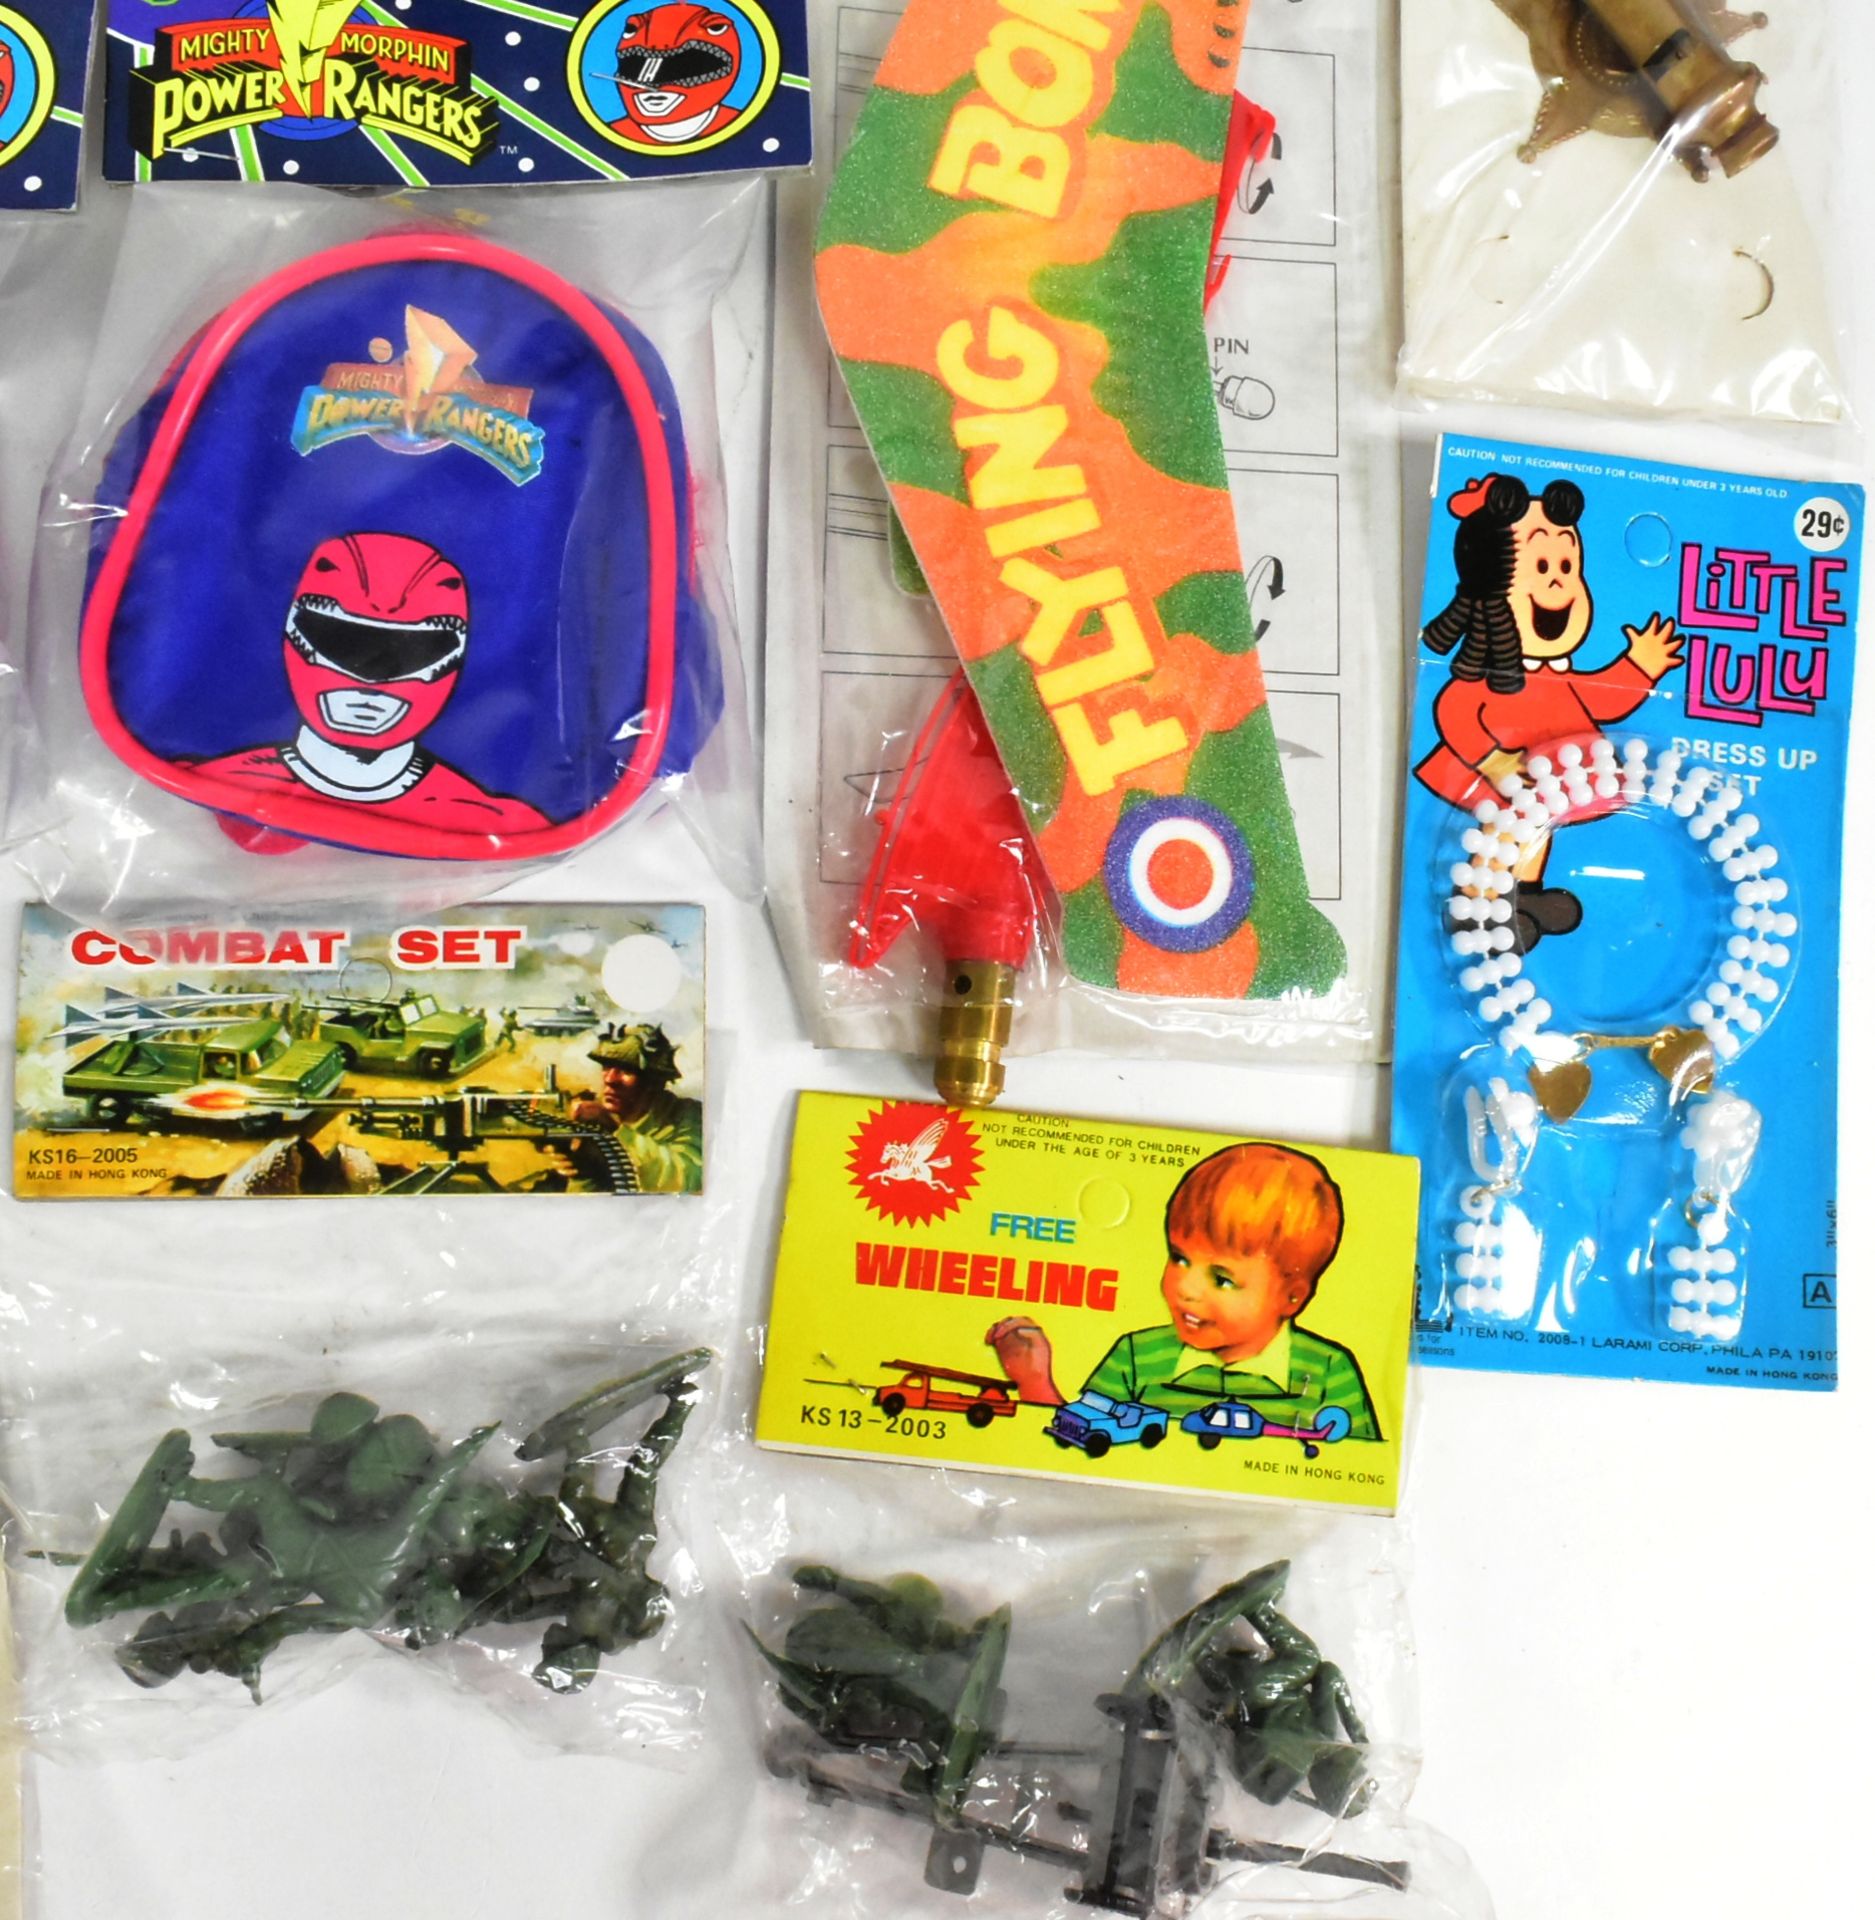 RACK PACK TOYS & NOVELTIES - COLLECTION OF ASSORTED ITEMS - Image 4 of 5